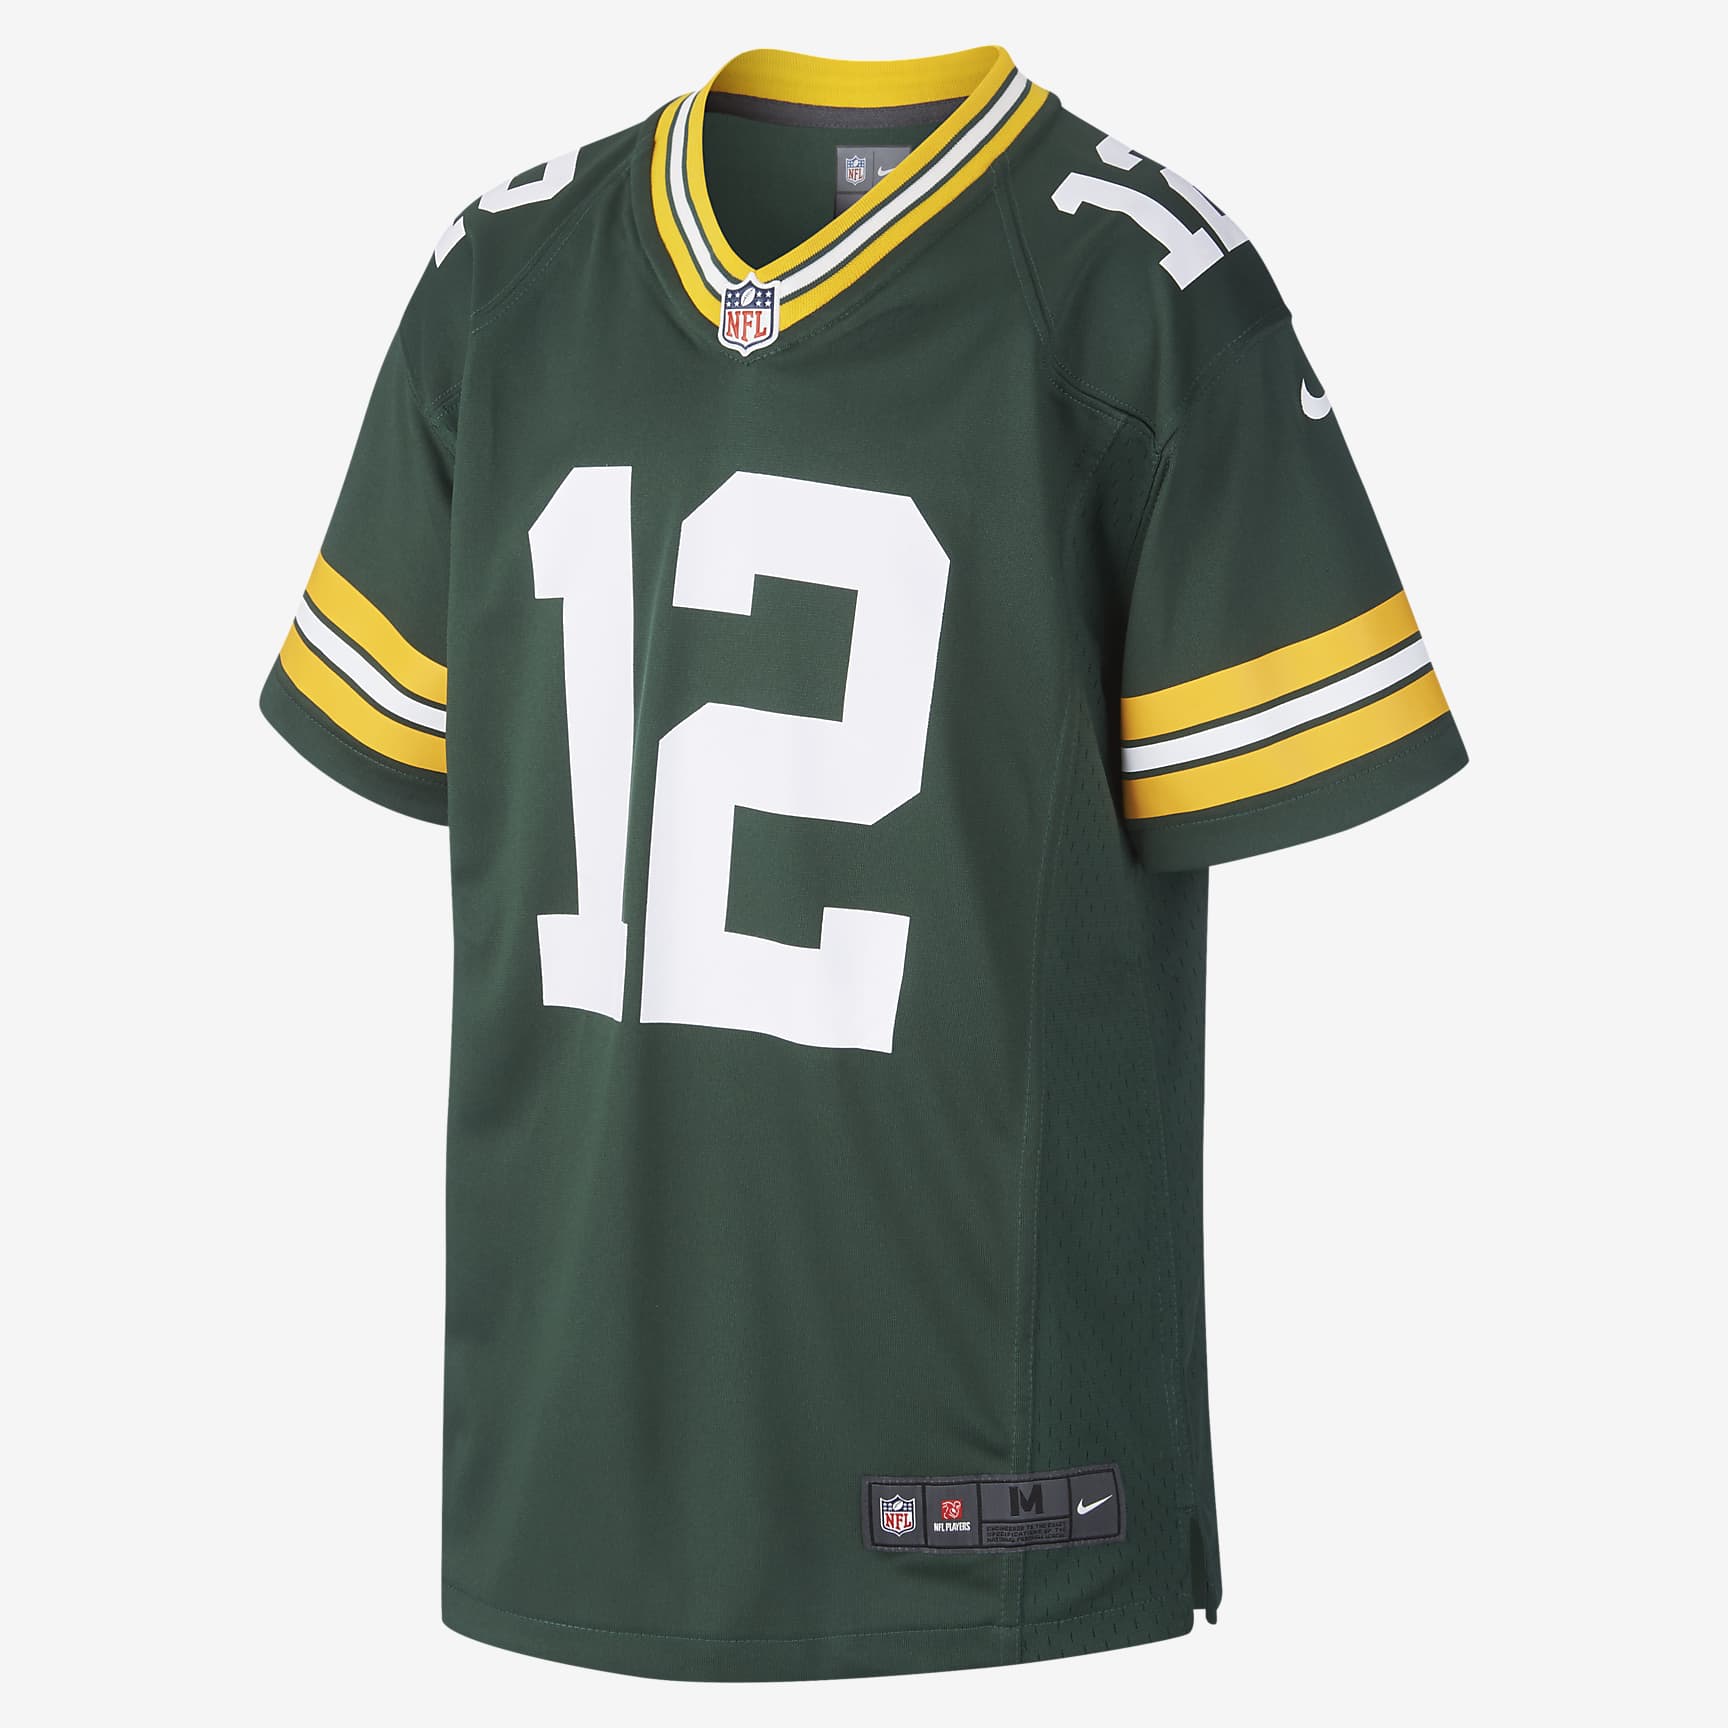 Maillot de football américain NFL Green Bay Packers Game (Aaron Rodgers